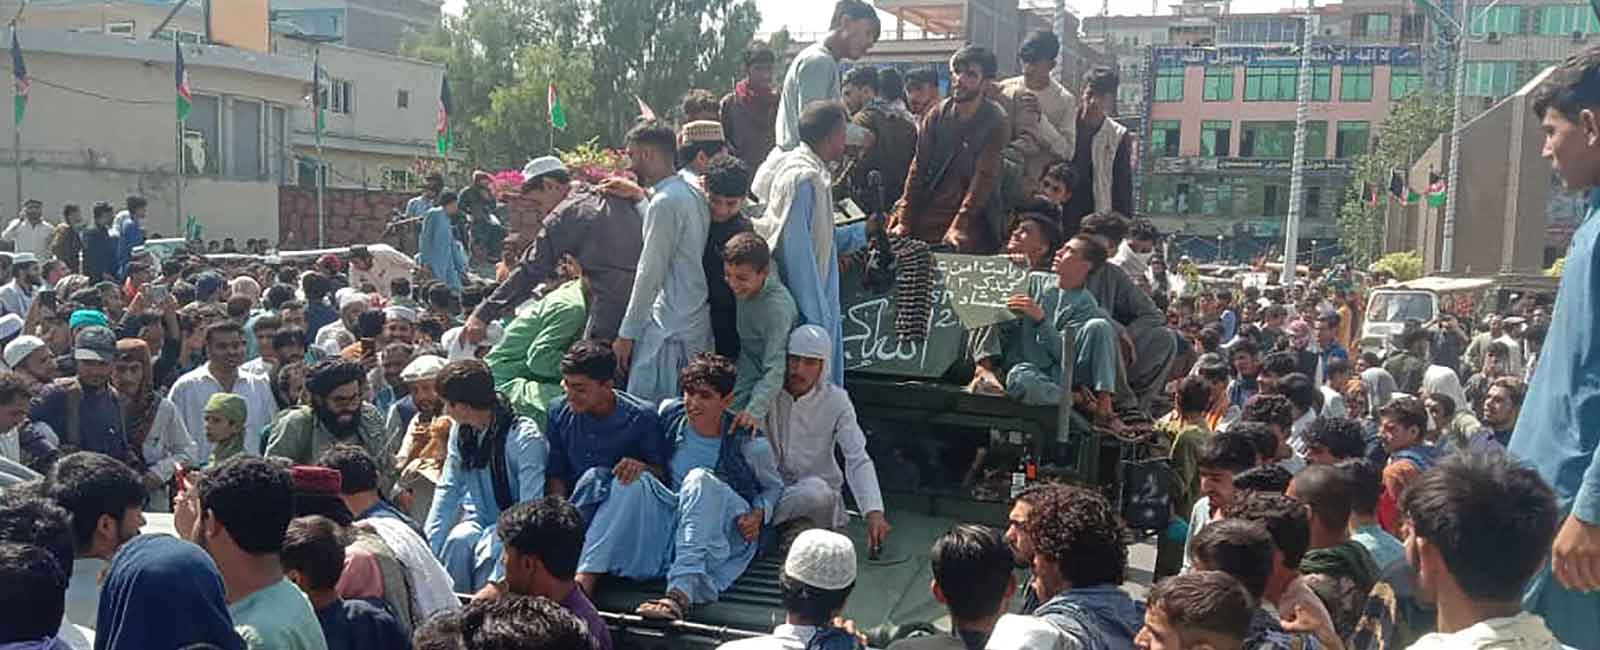 Taliban fighters and local people sit on an Afghan National Army (ANA) humvee vehicle on a street in Jalalabad province on August 15, 2021. — Photo by AFP